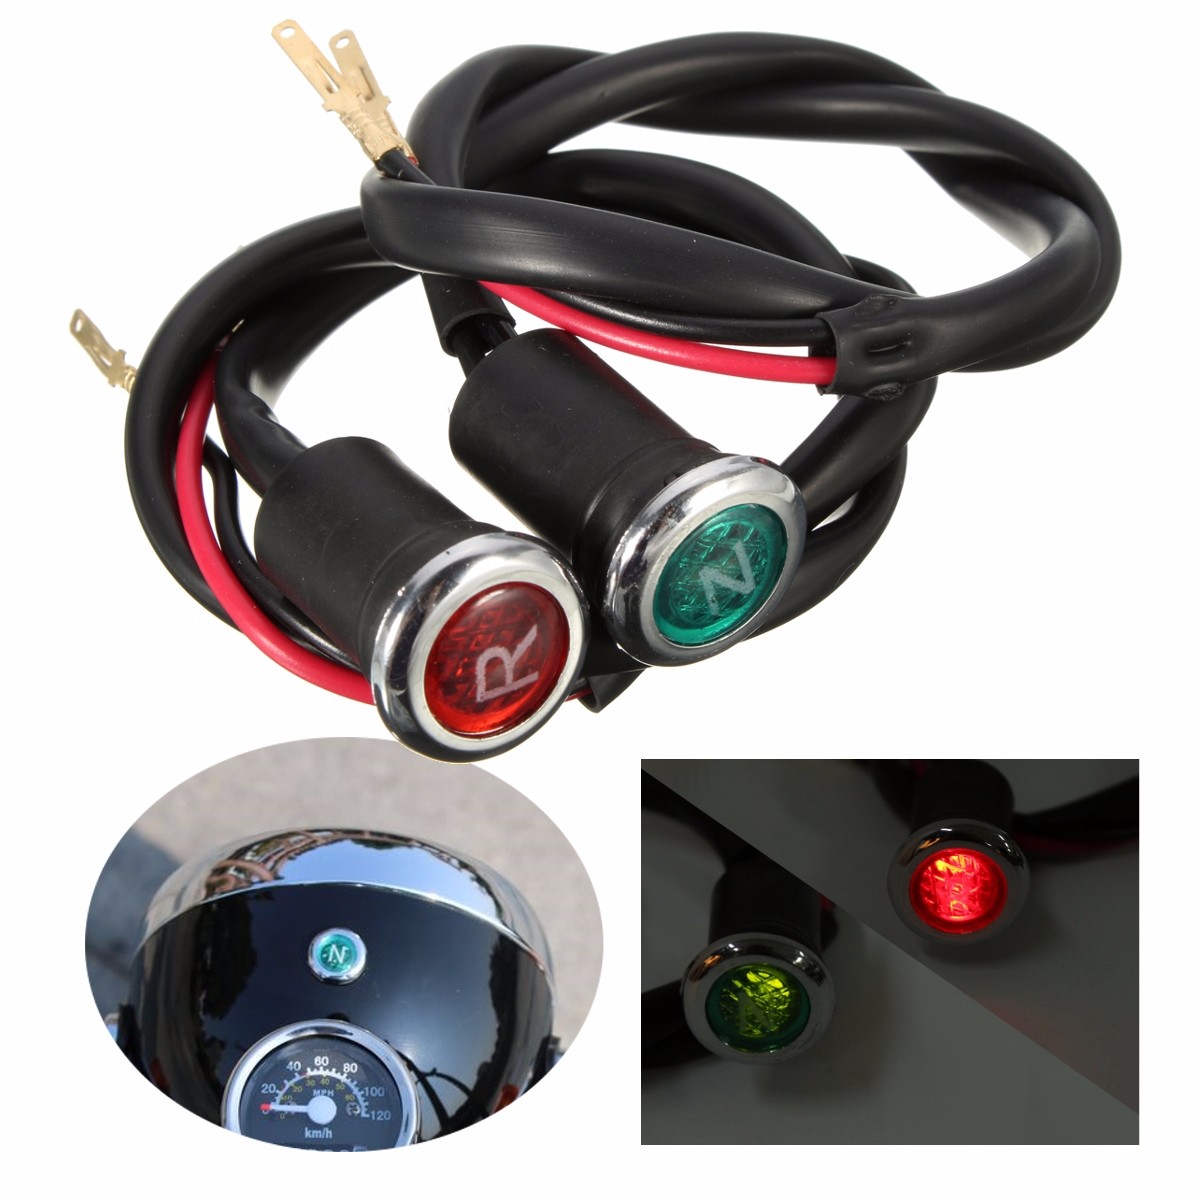 

Neutral Reverse Light Gear N/R Indicator For 50 110 125 150 200 250cc ATV Motorcycle